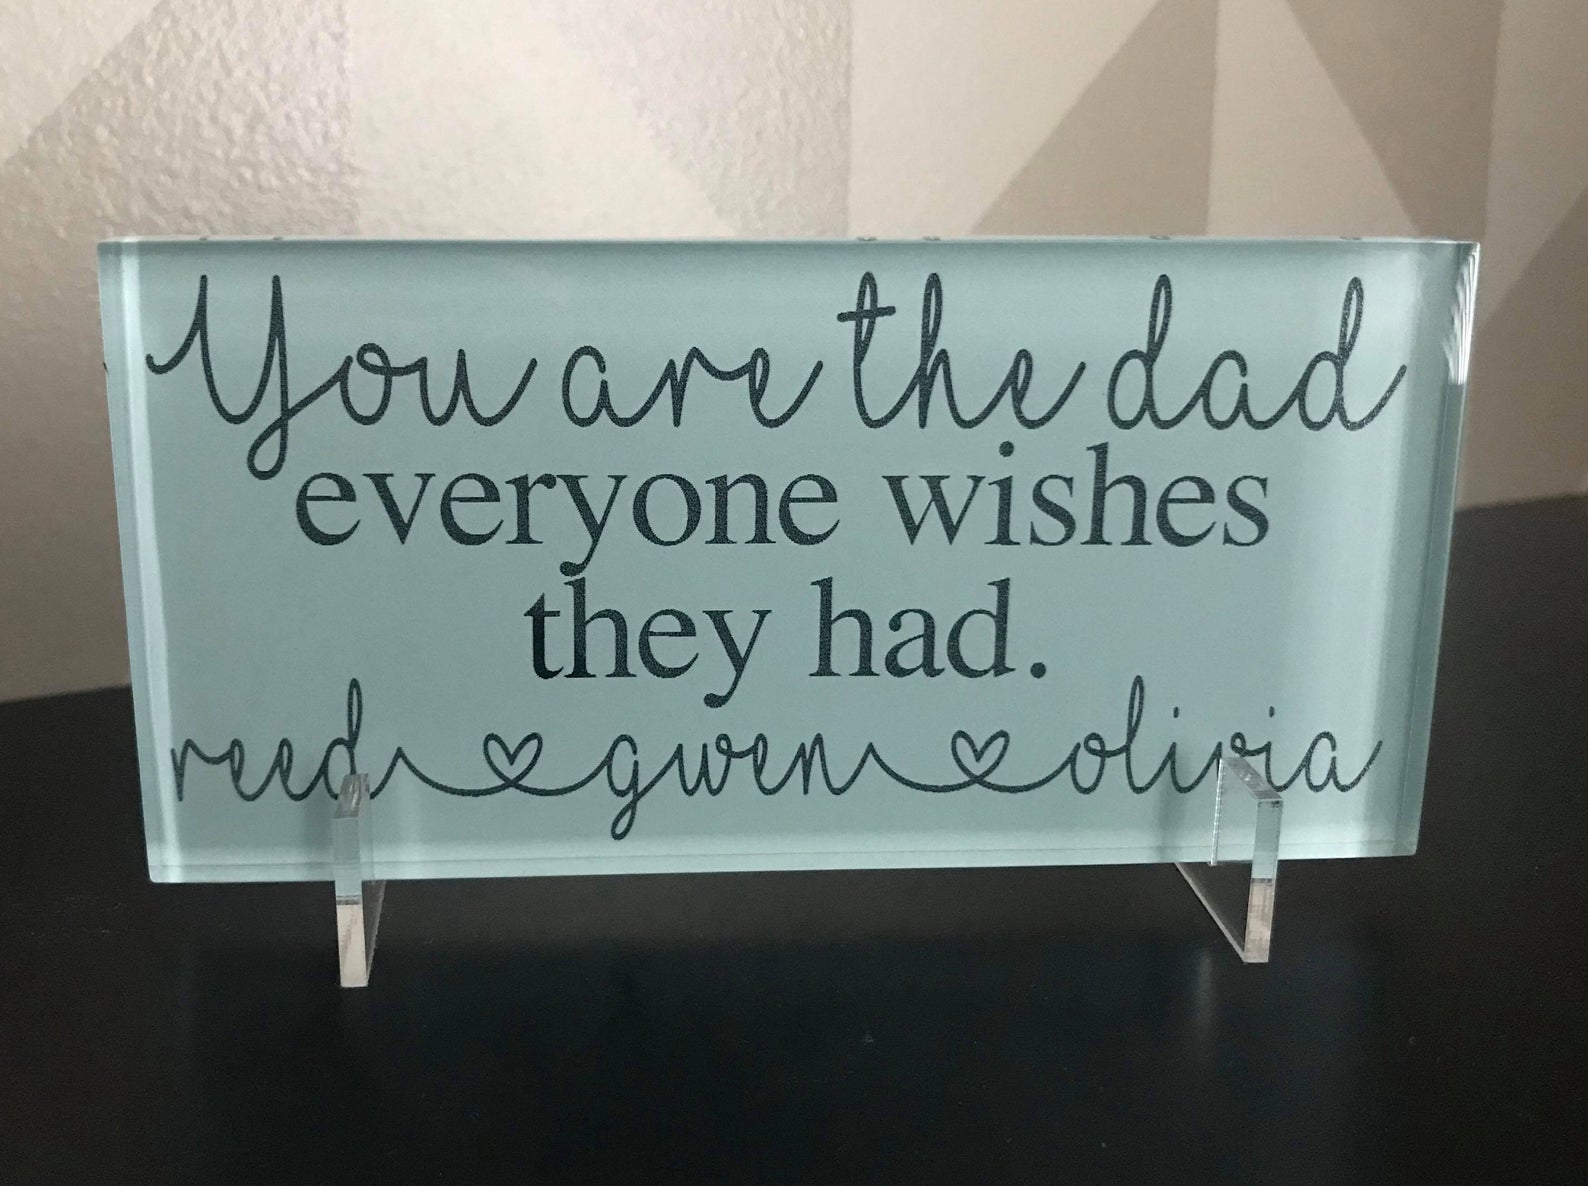 Custom Engraved Glass Father's Day Tile You are the dad everyone wishes they had